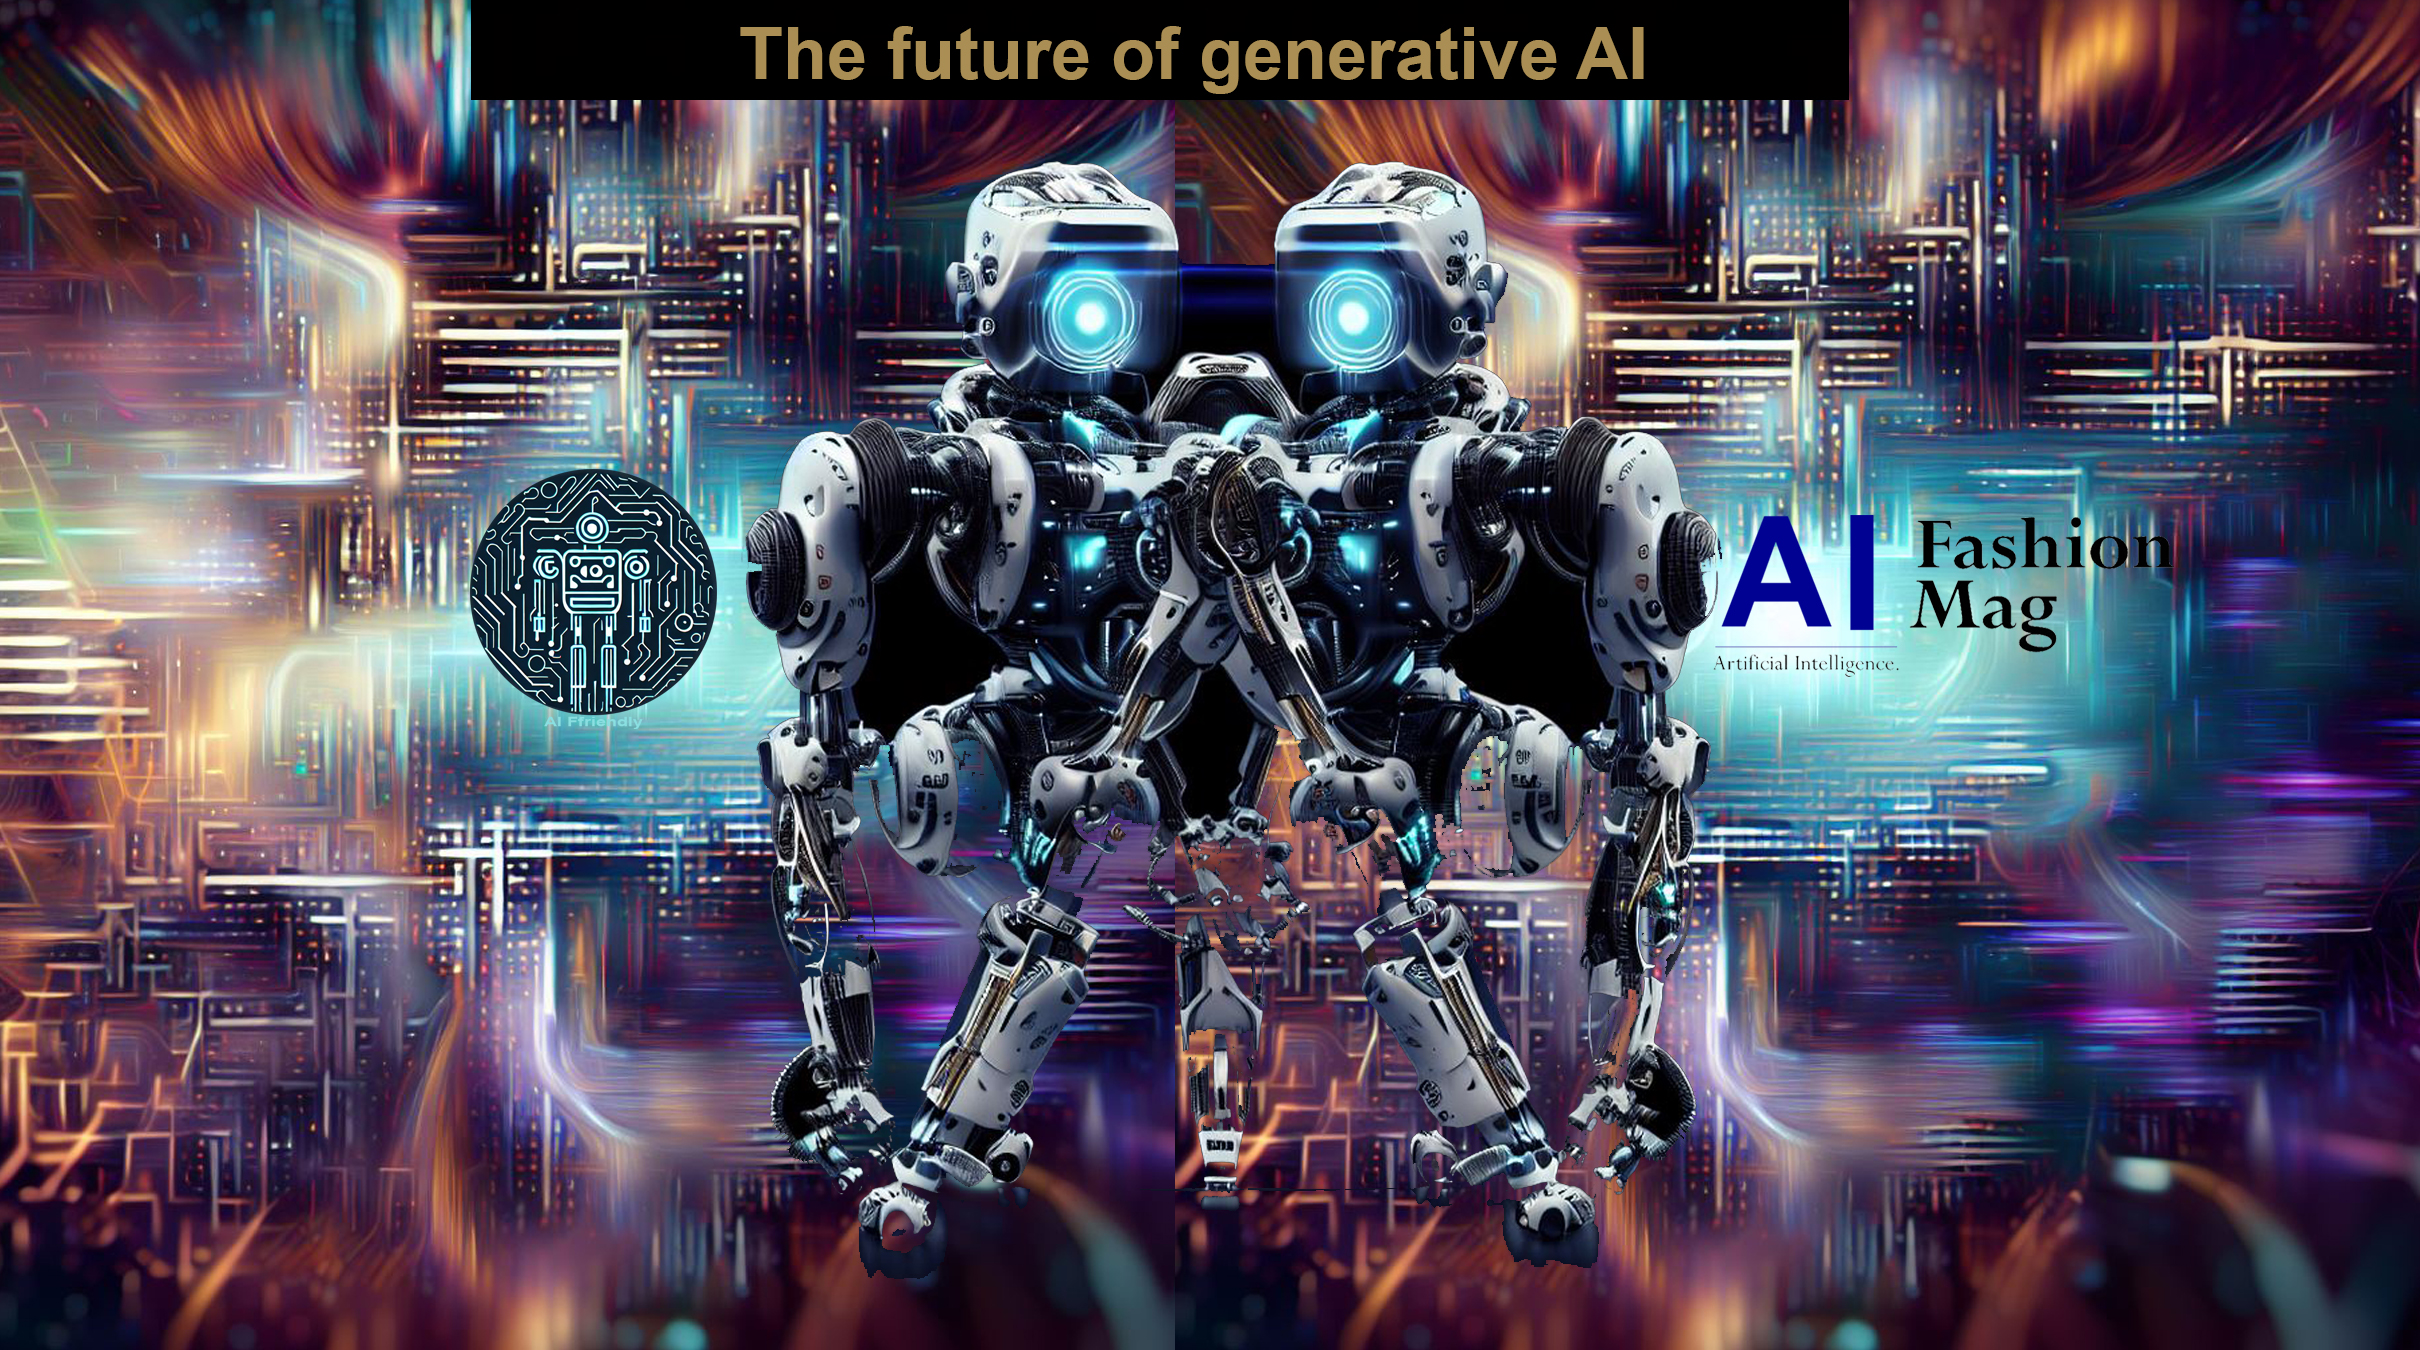 AFRICA-VOGUE-COVER-The-future-of-generative-AI-DN-AFRICA-Media-Partner